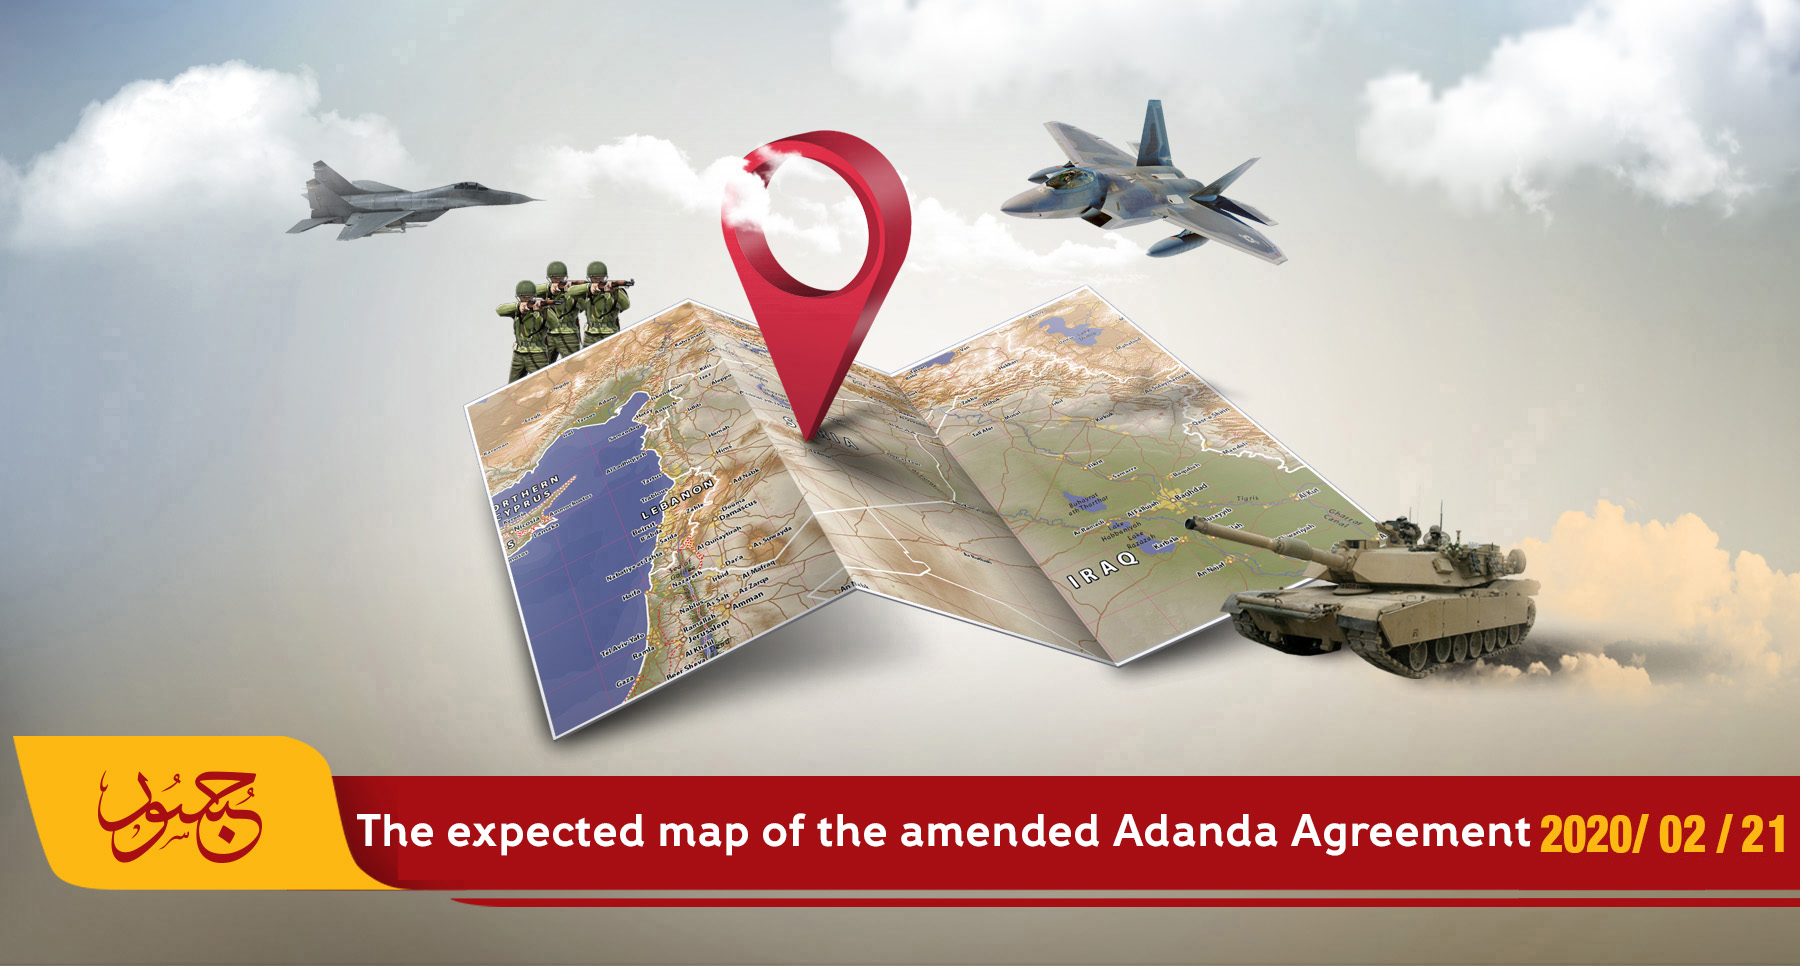 The expected map of the amended Adanda Agreement